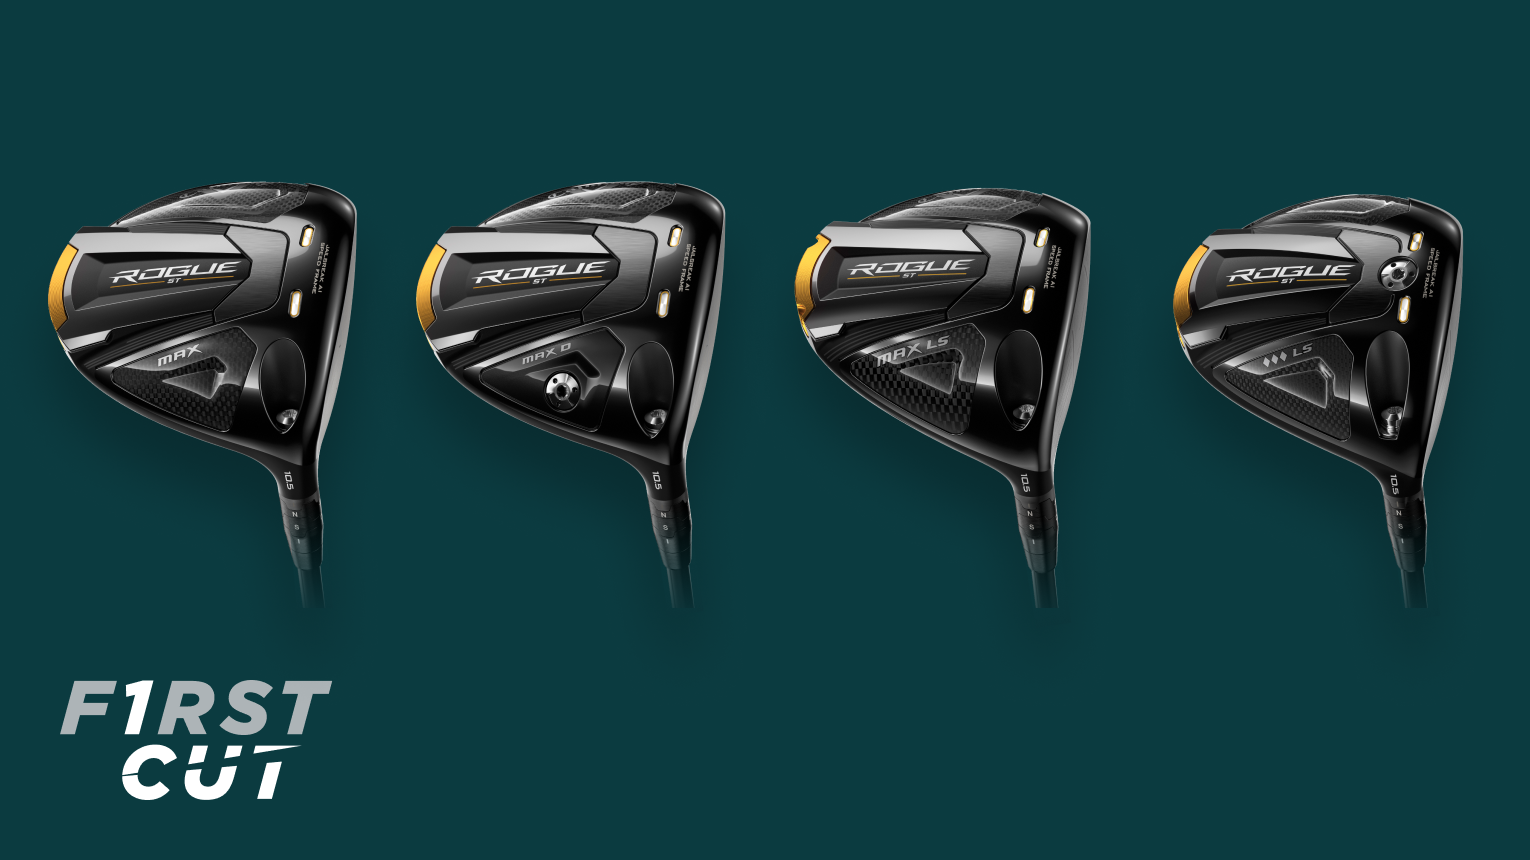 Callaway Rogue ST drivers: What you need to know | Golf Equipment: Clubs,  Balls, Bags | Golf Digest